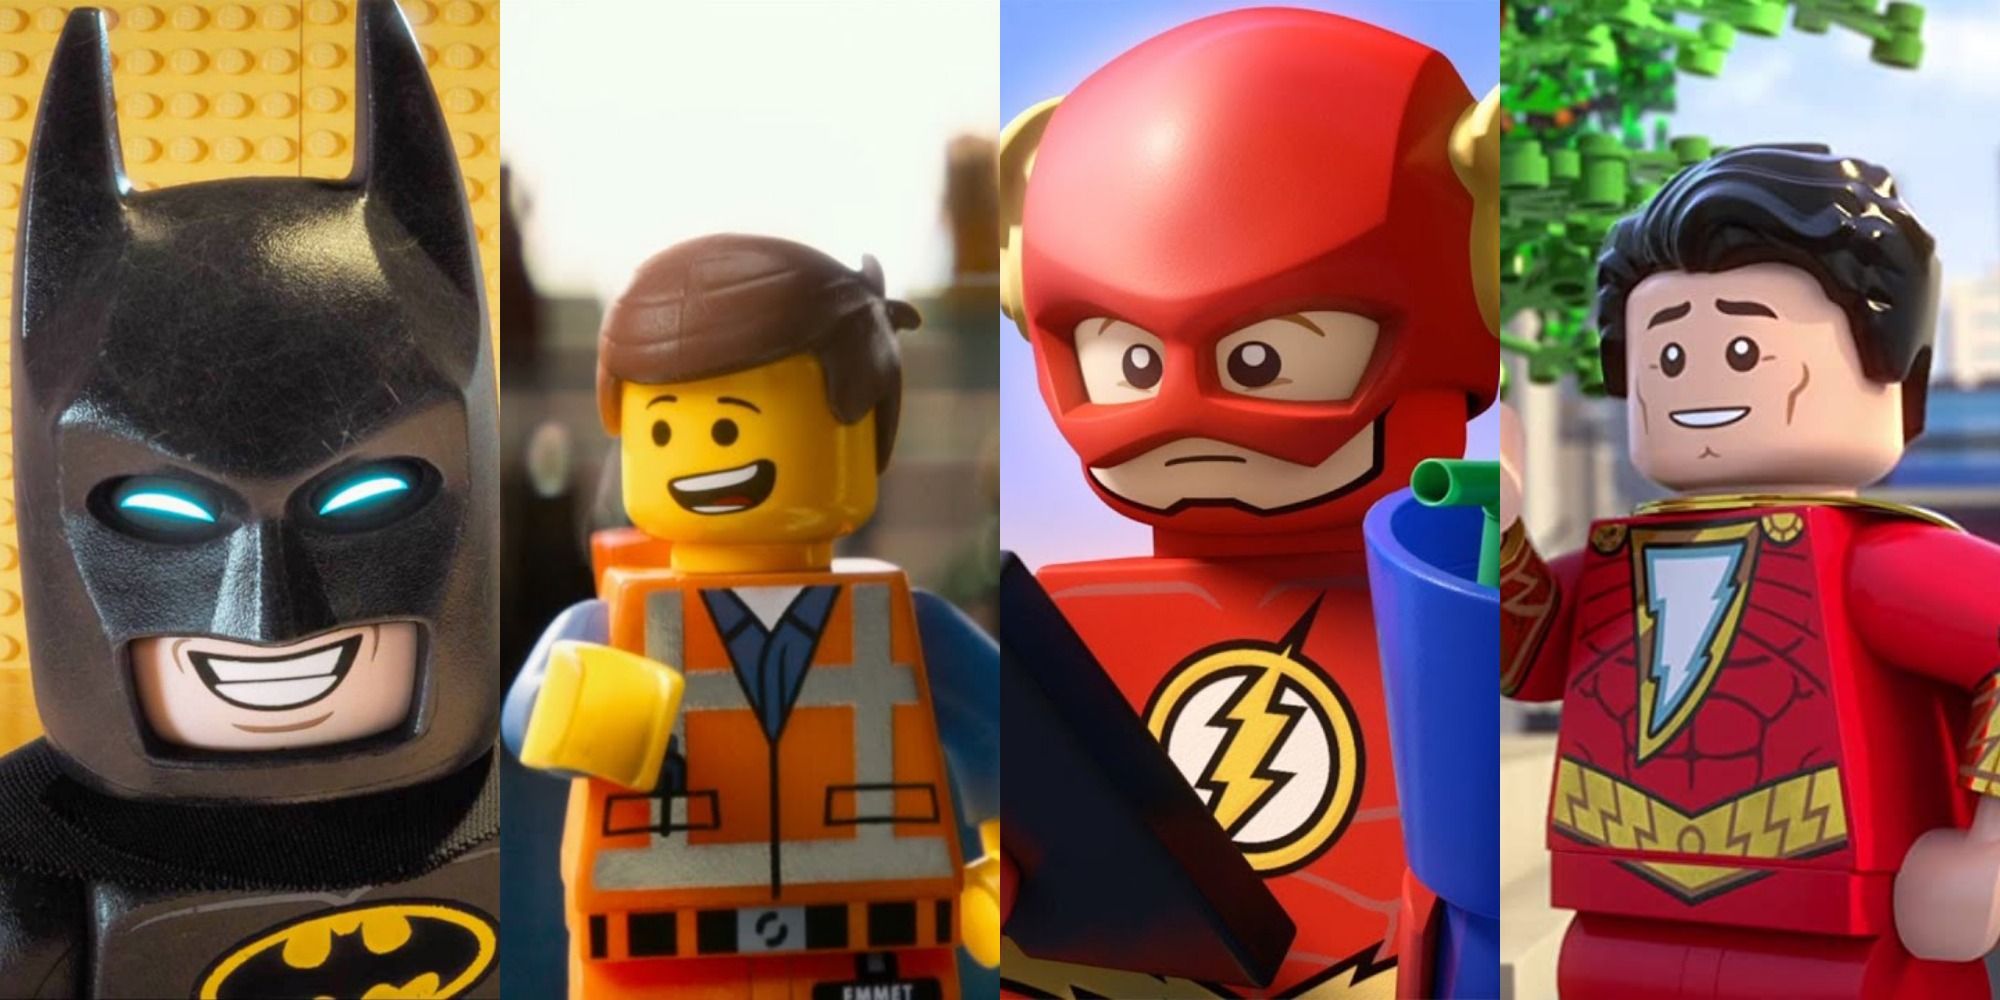 Top 10 Lego Movies Ranked Worst to Best According to IMDb